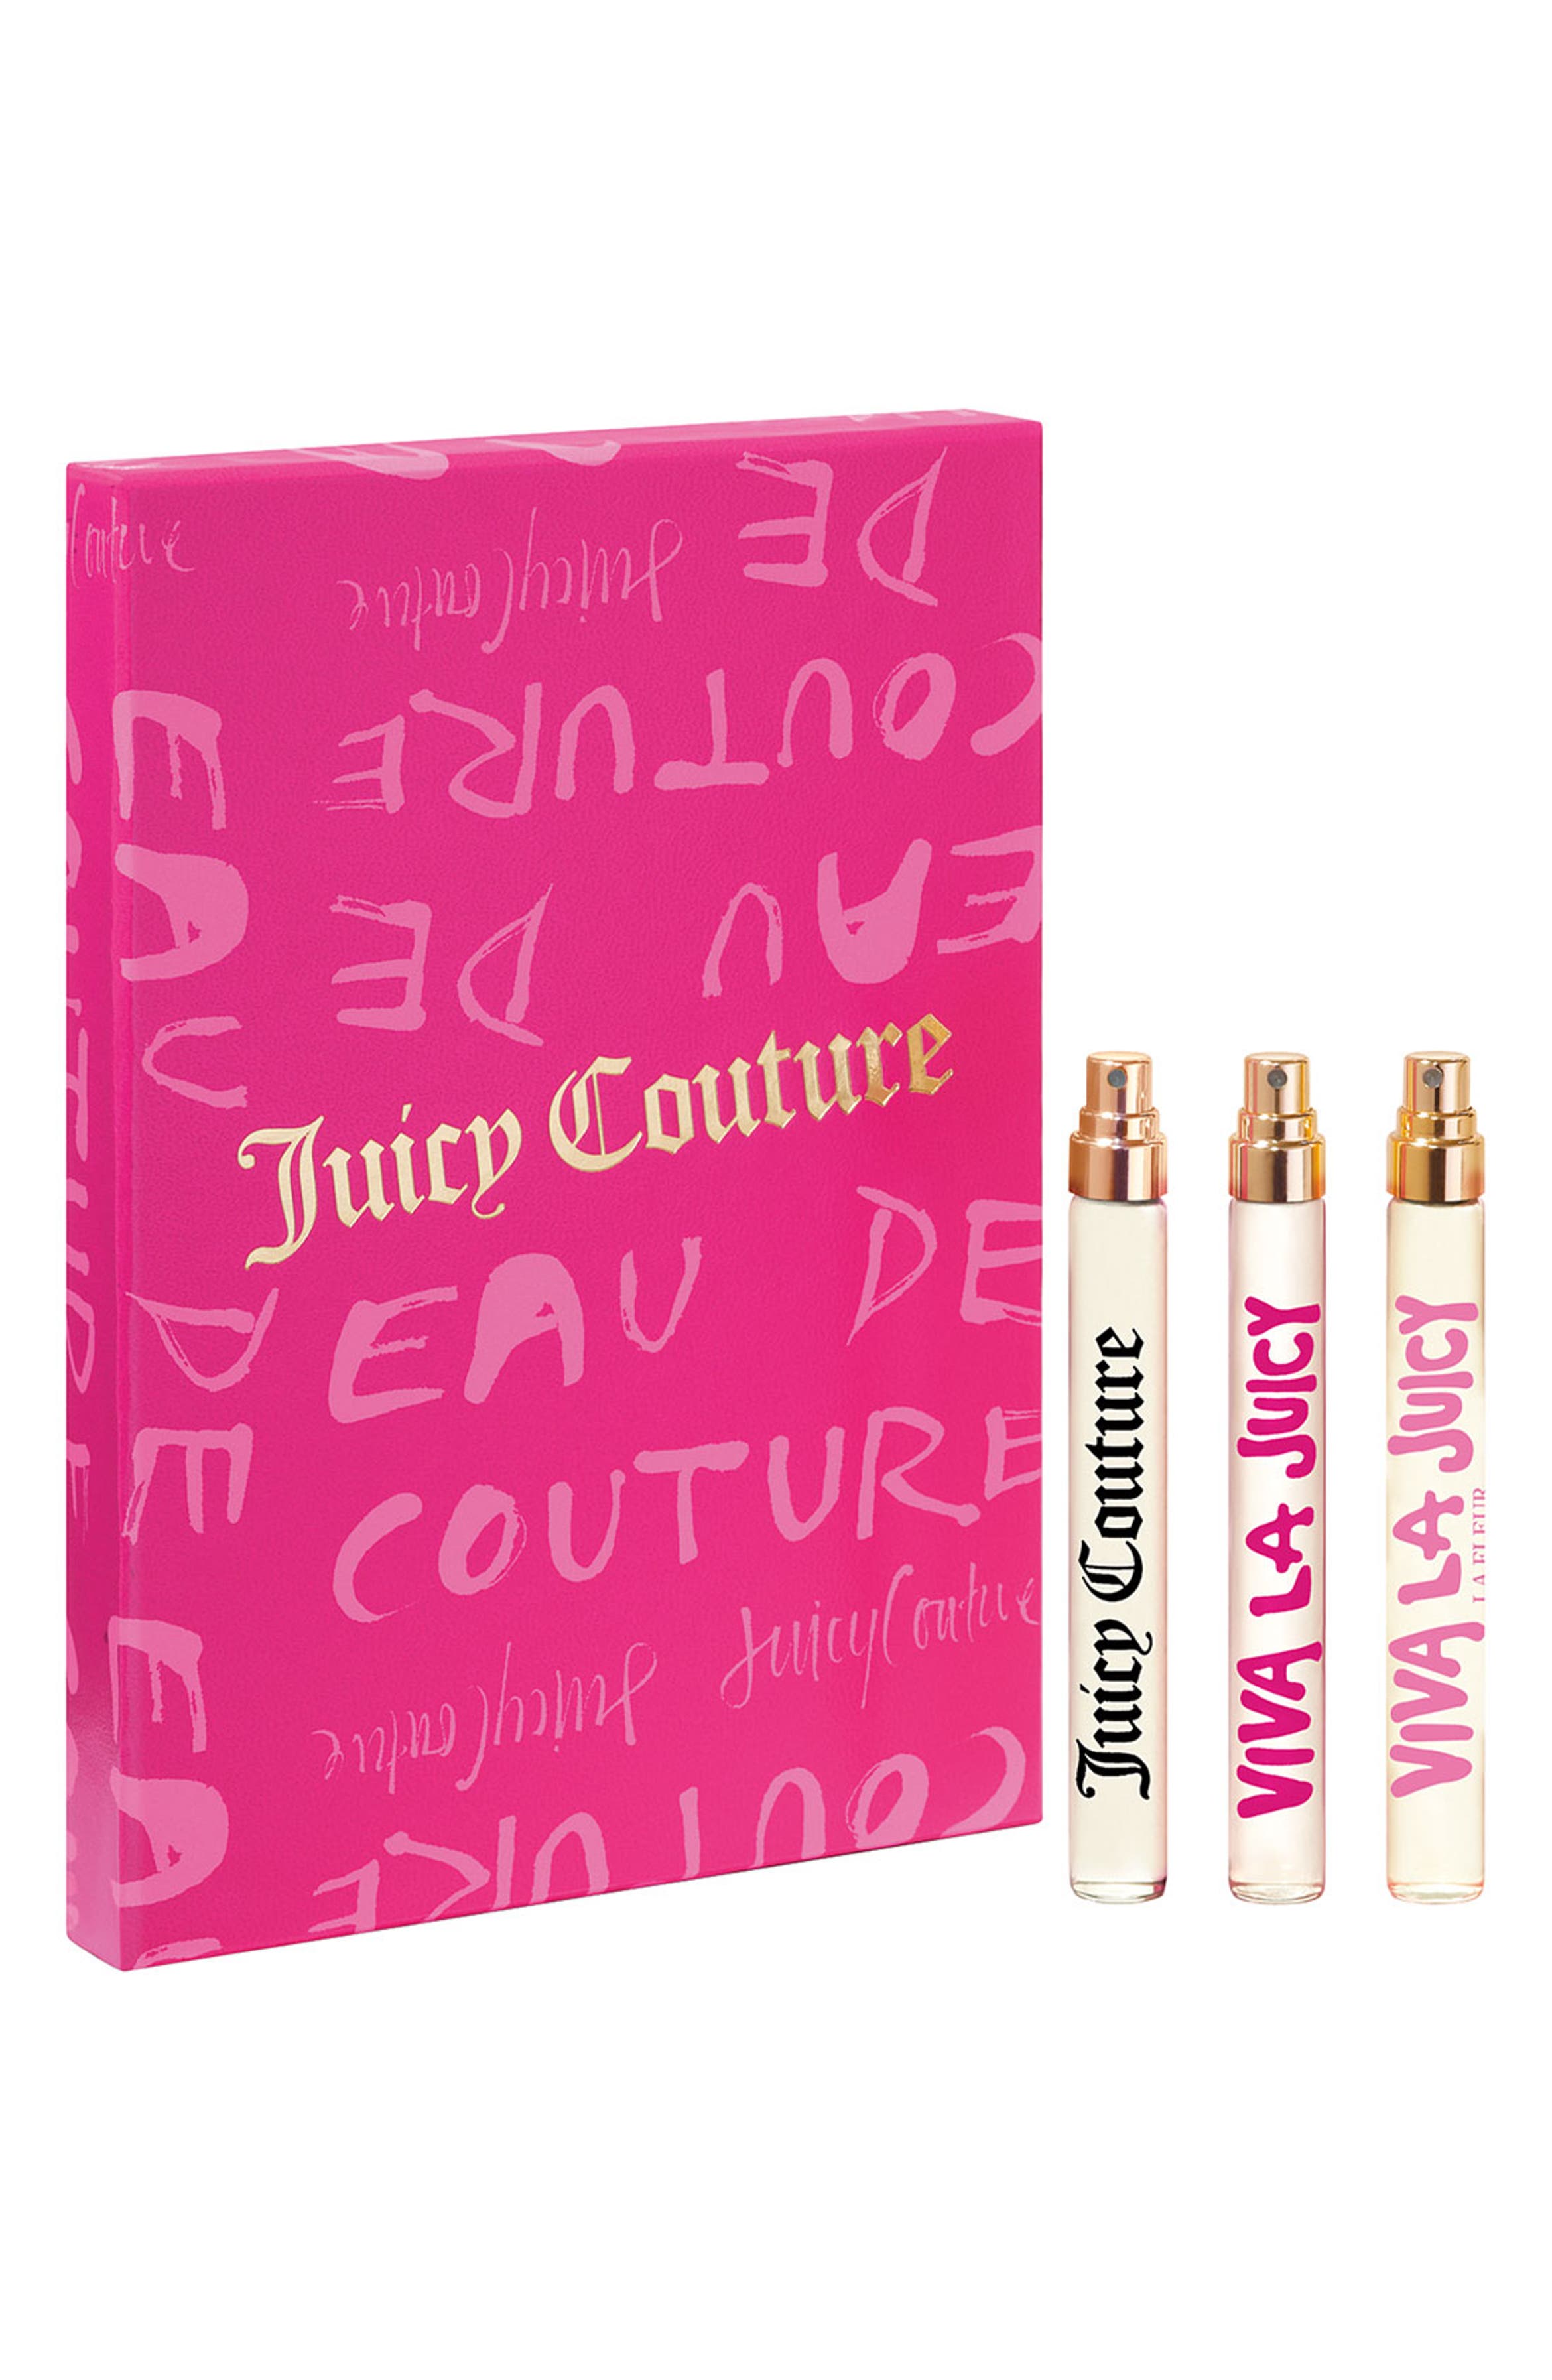 Juicy Couture Fragrance Travel Set ($48 Value) | Nordstrom